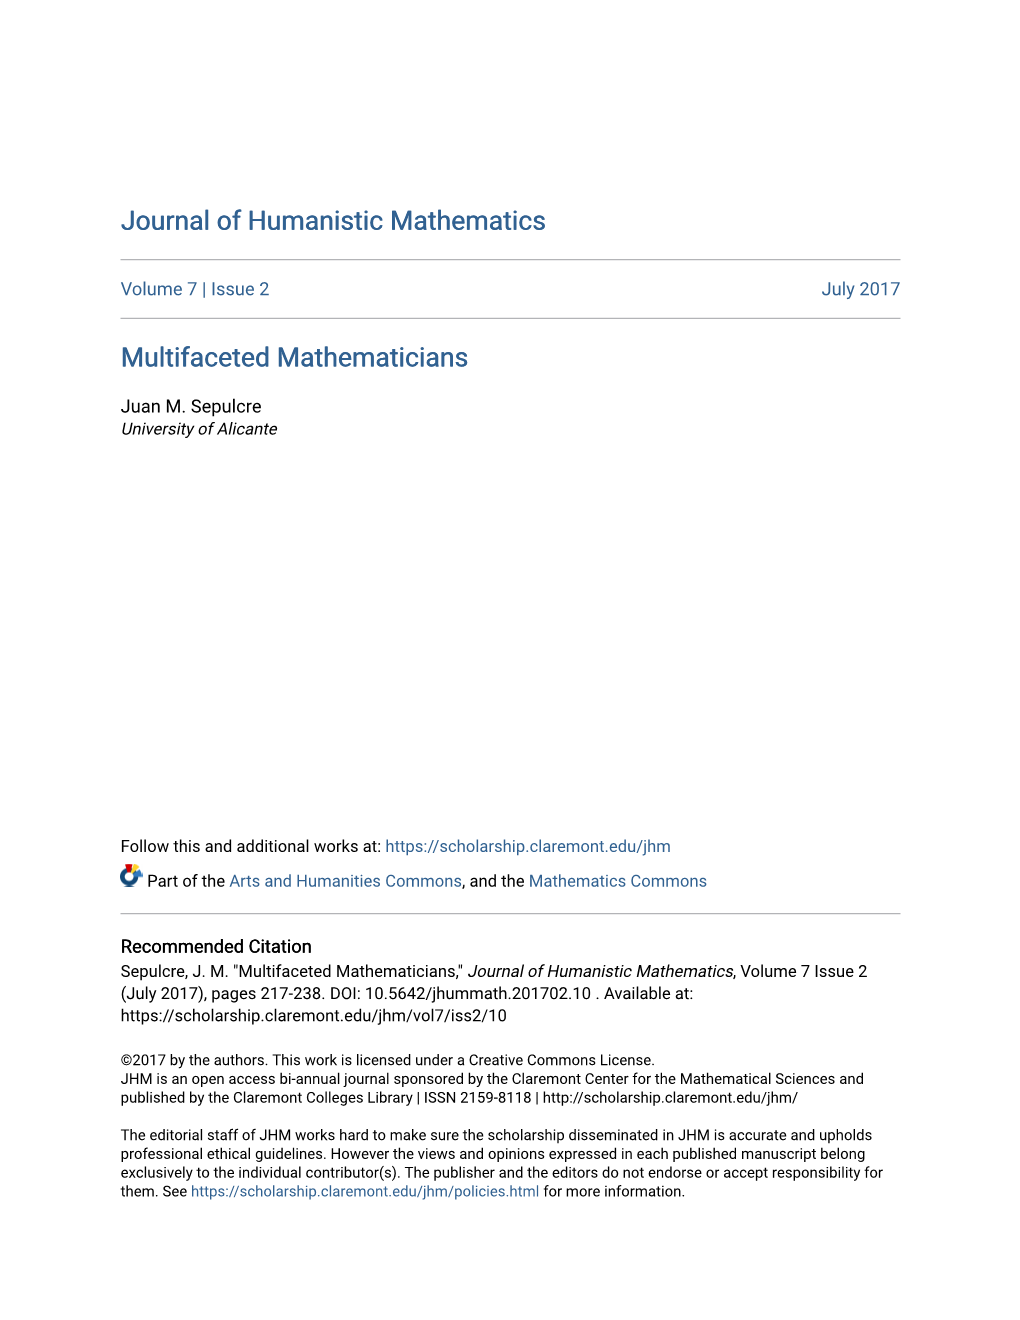 Multifaceted Mathematicians